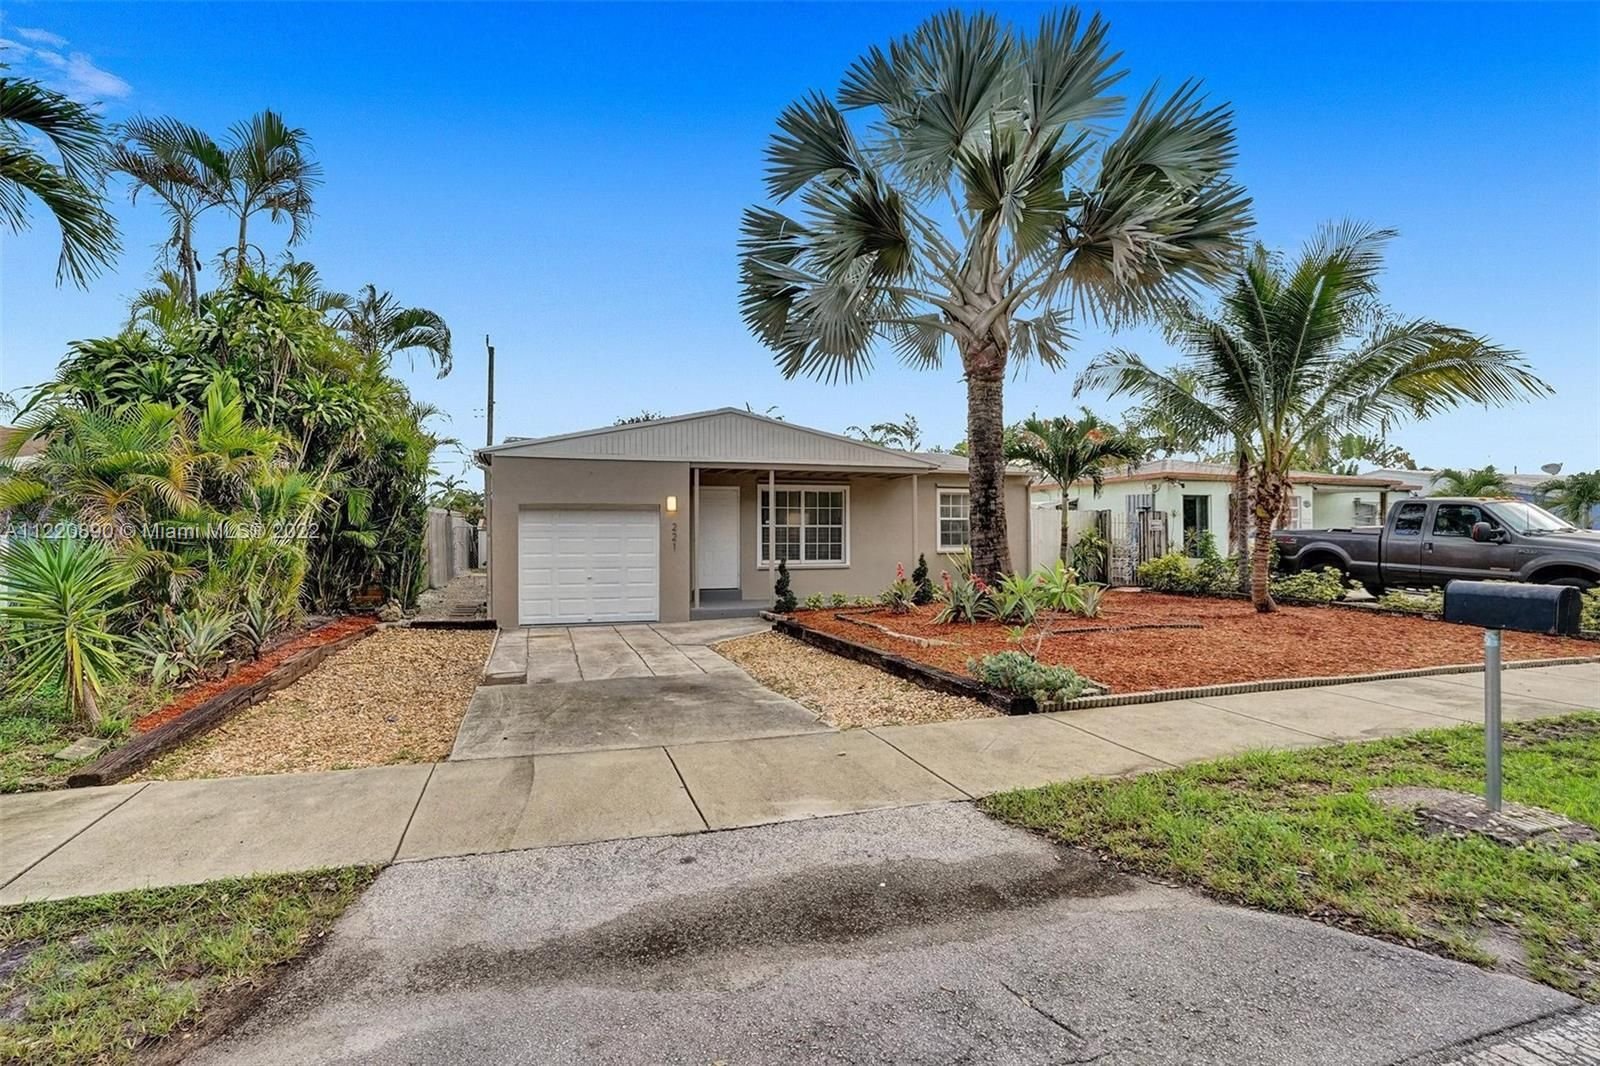 Real estate property located at 221 51st St, Broward County, Oakland Park, FL